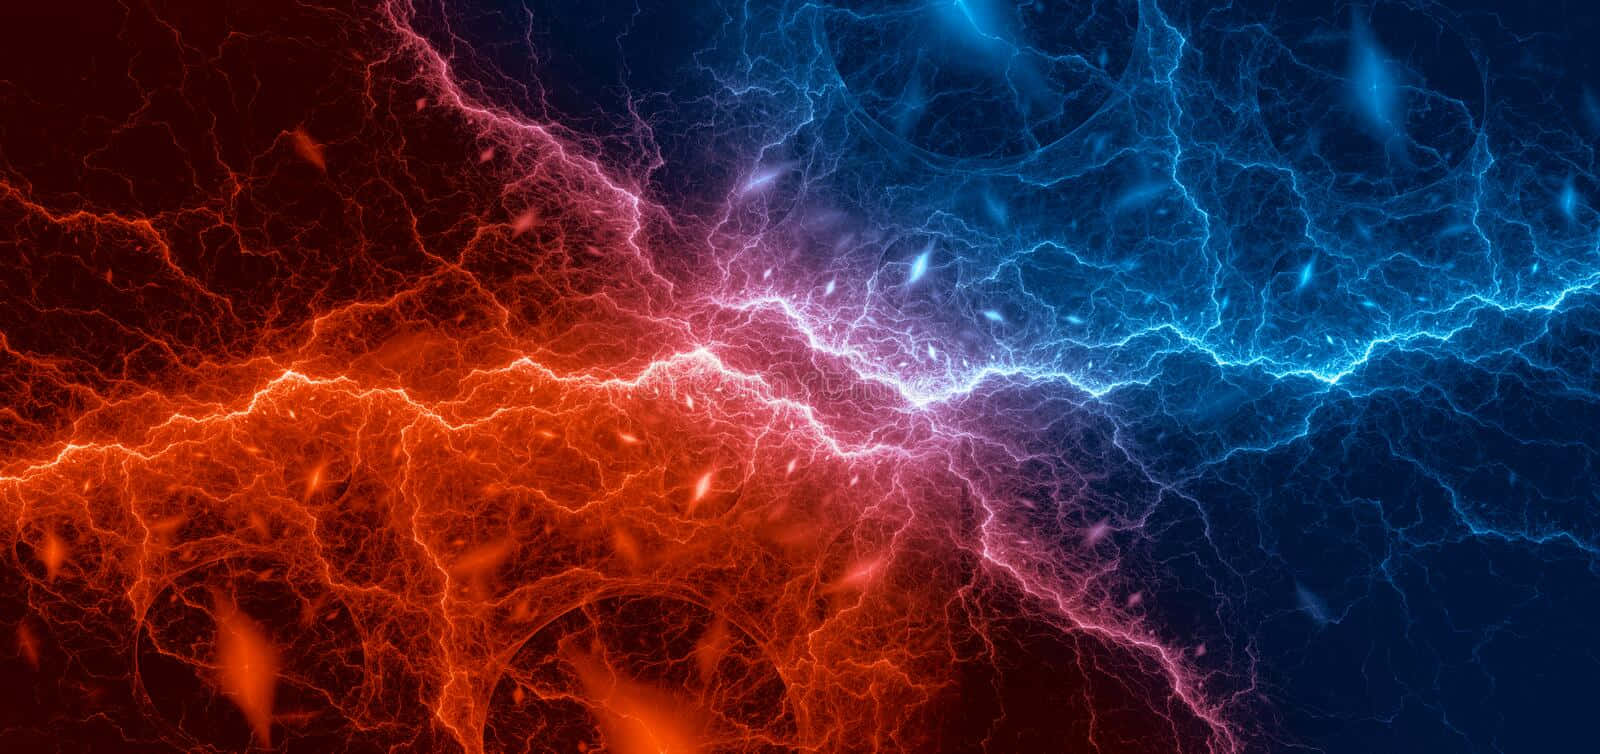 Download A Blue And Red Lightning Bolt On A Dark Background Wallpaper |  